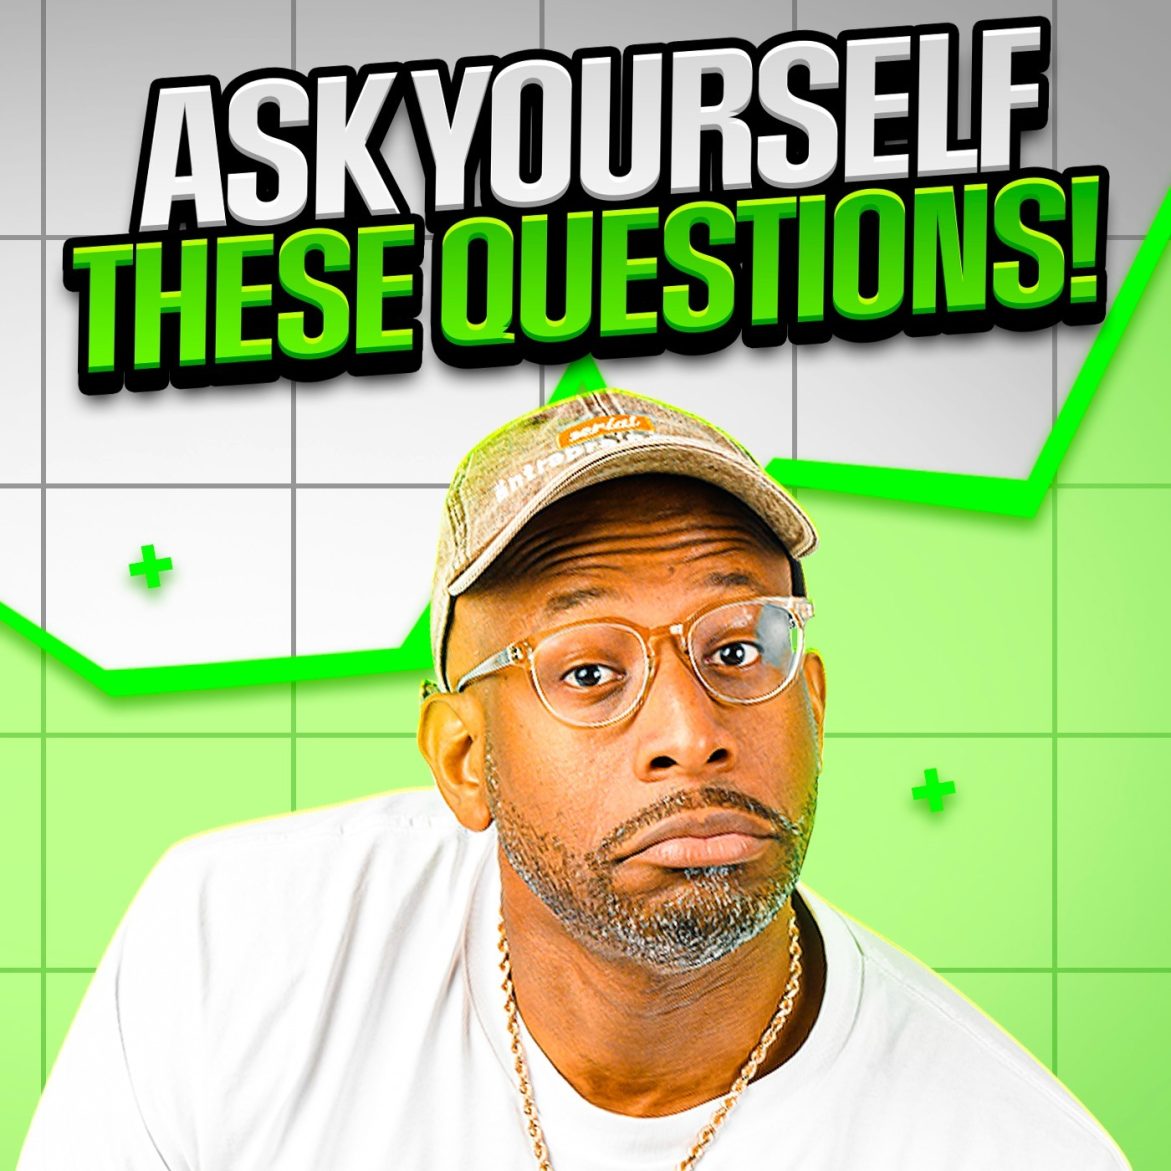 Black Podcasting - What QUESTIONS Are You Asking Yourself?